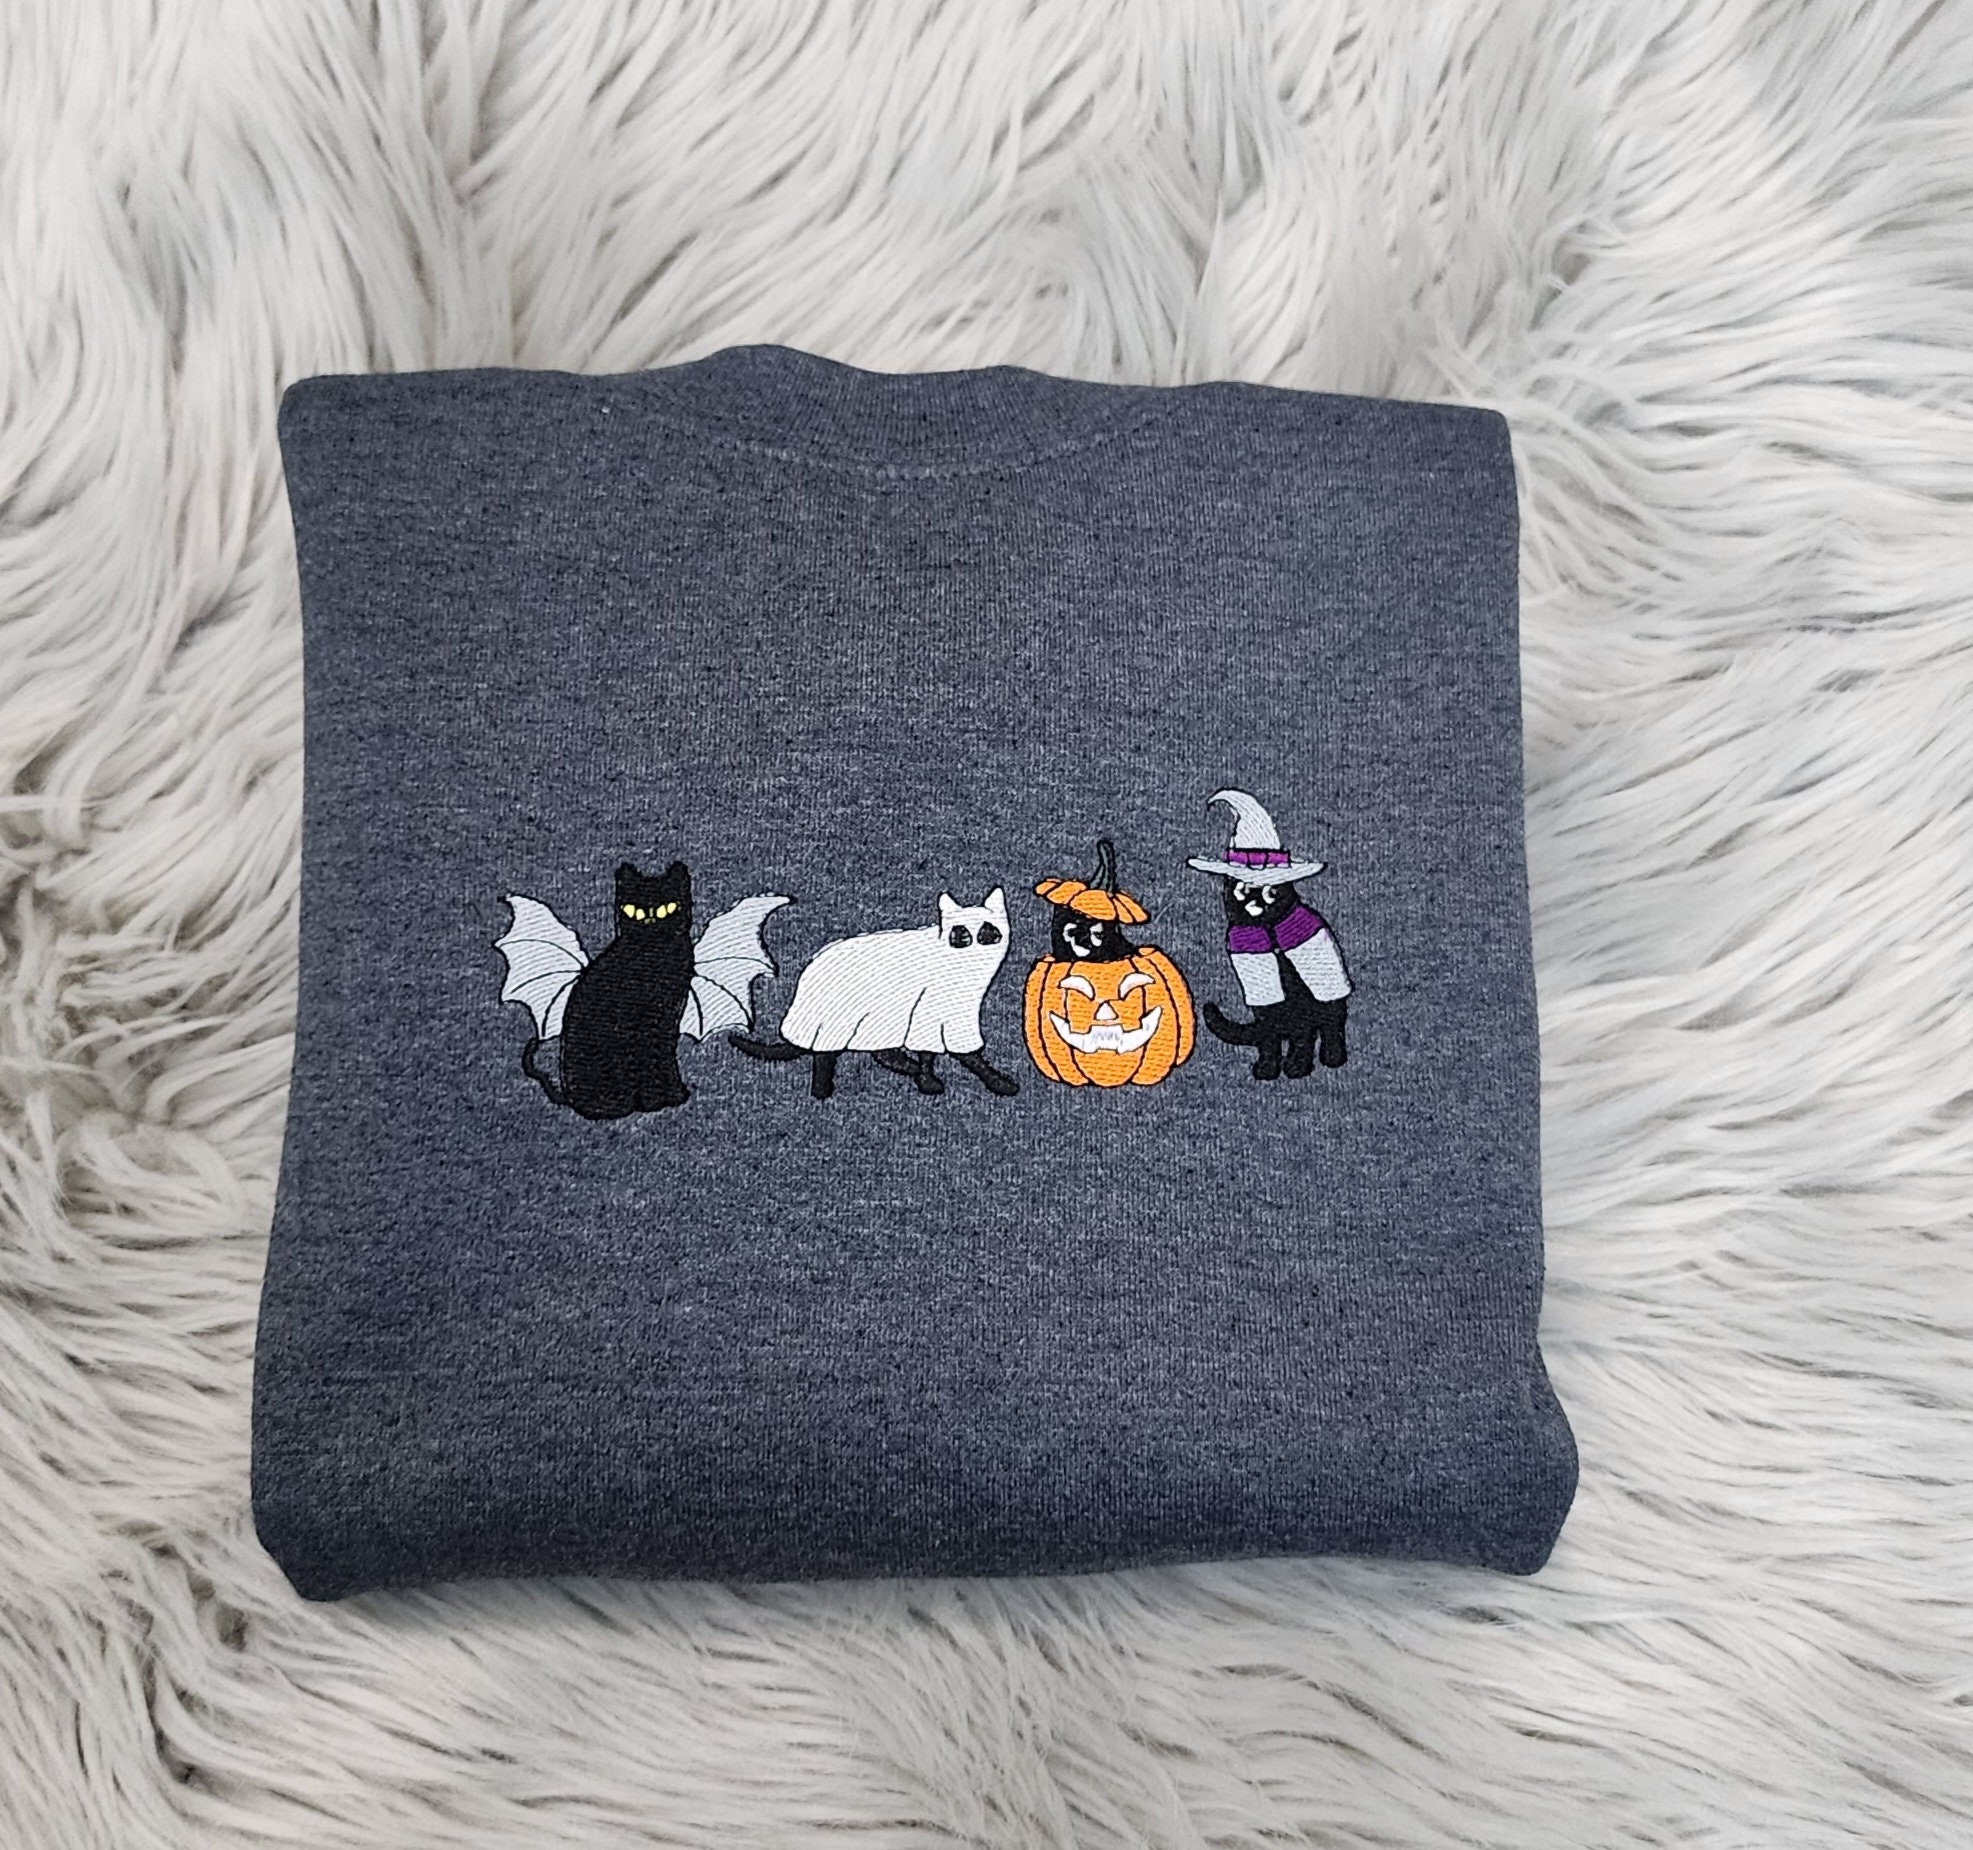 Discover Ghost Cats Halloween Embroidery Sweatshirt, Halloween Ghost Cats Embroidered Unisex Sweatshirt or Hooded Sweatshirt